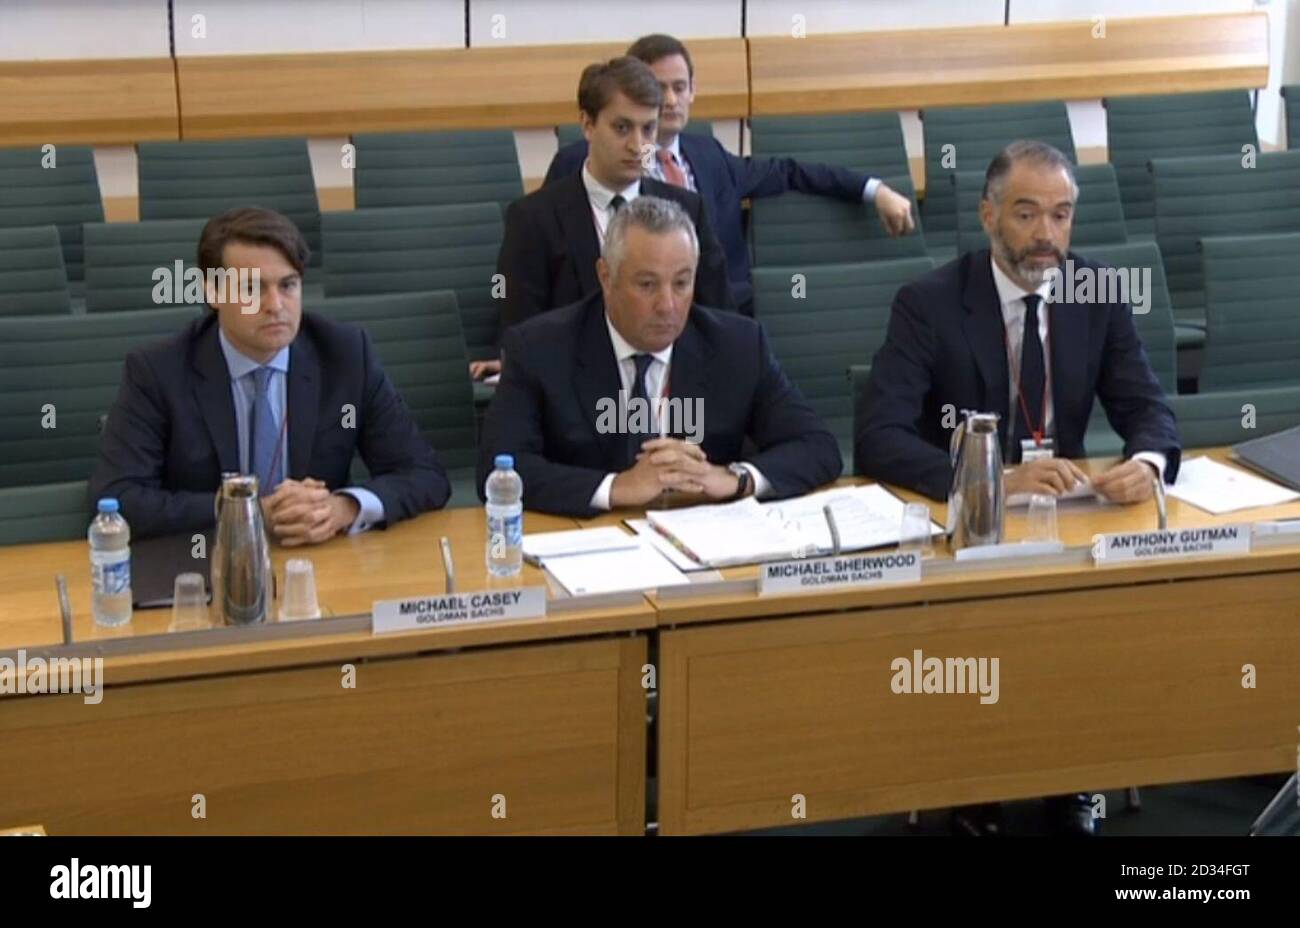 (left to right) Michael Casey of Goldman Sachs, Michael Sherwood, Vice Chairman at Goldman Sachs, and Anthony Gutman, Co-Head of Goldman Sachs and EMEA Investment Banking Services appear before the Business, Innovation and Skills Committee at Portcullis House in London, on the collapse of BHS. Stock Photo